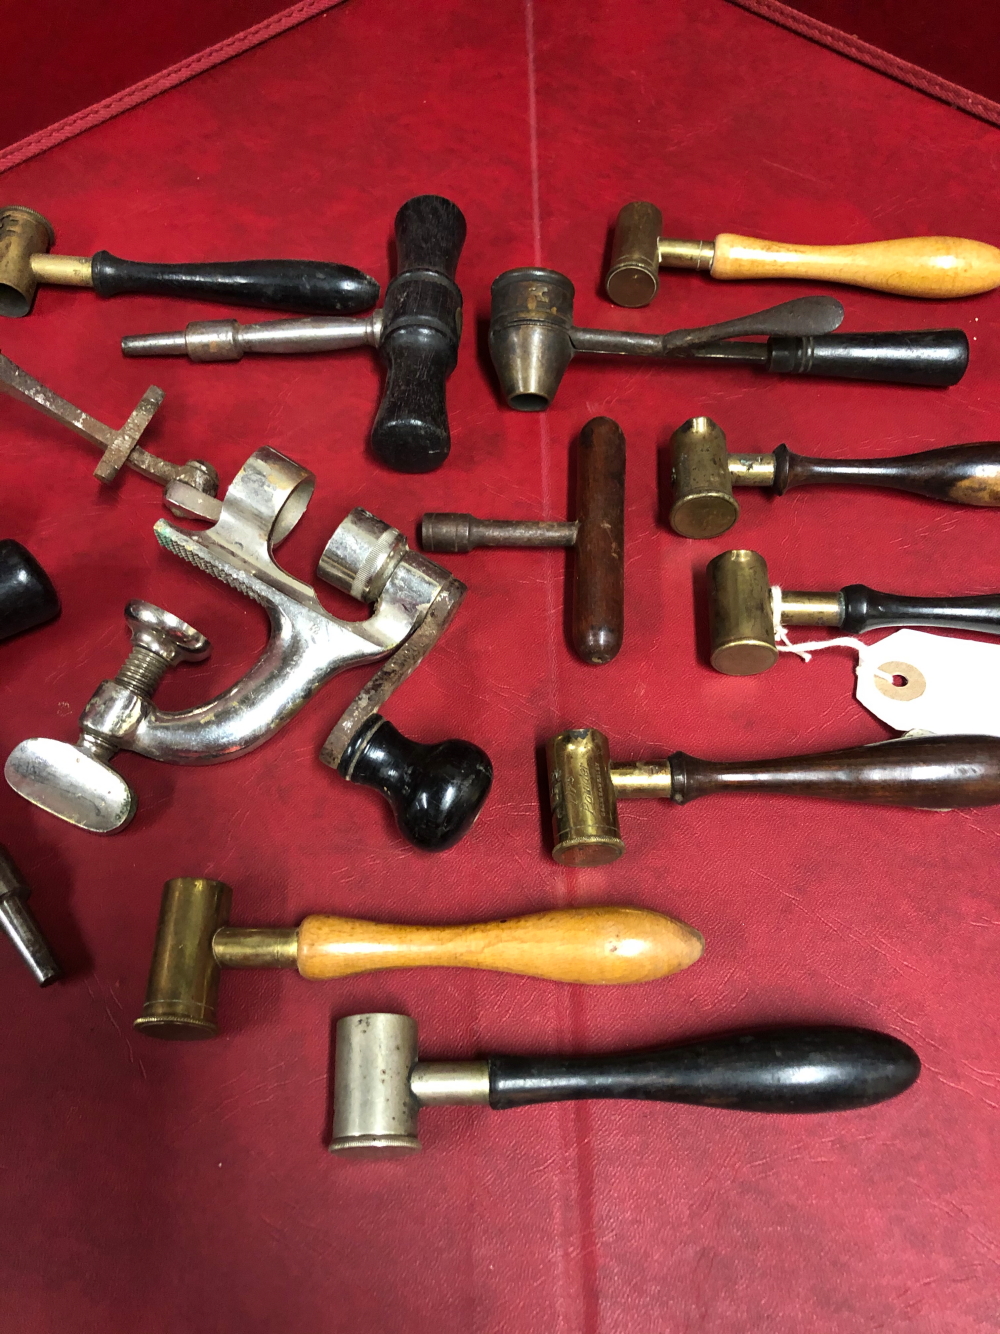 A COLLECTION OF SHOTGUN CARTRIDGE MAKING TOOLS, MEASURES AND A CLAMP - Image 8 of 8